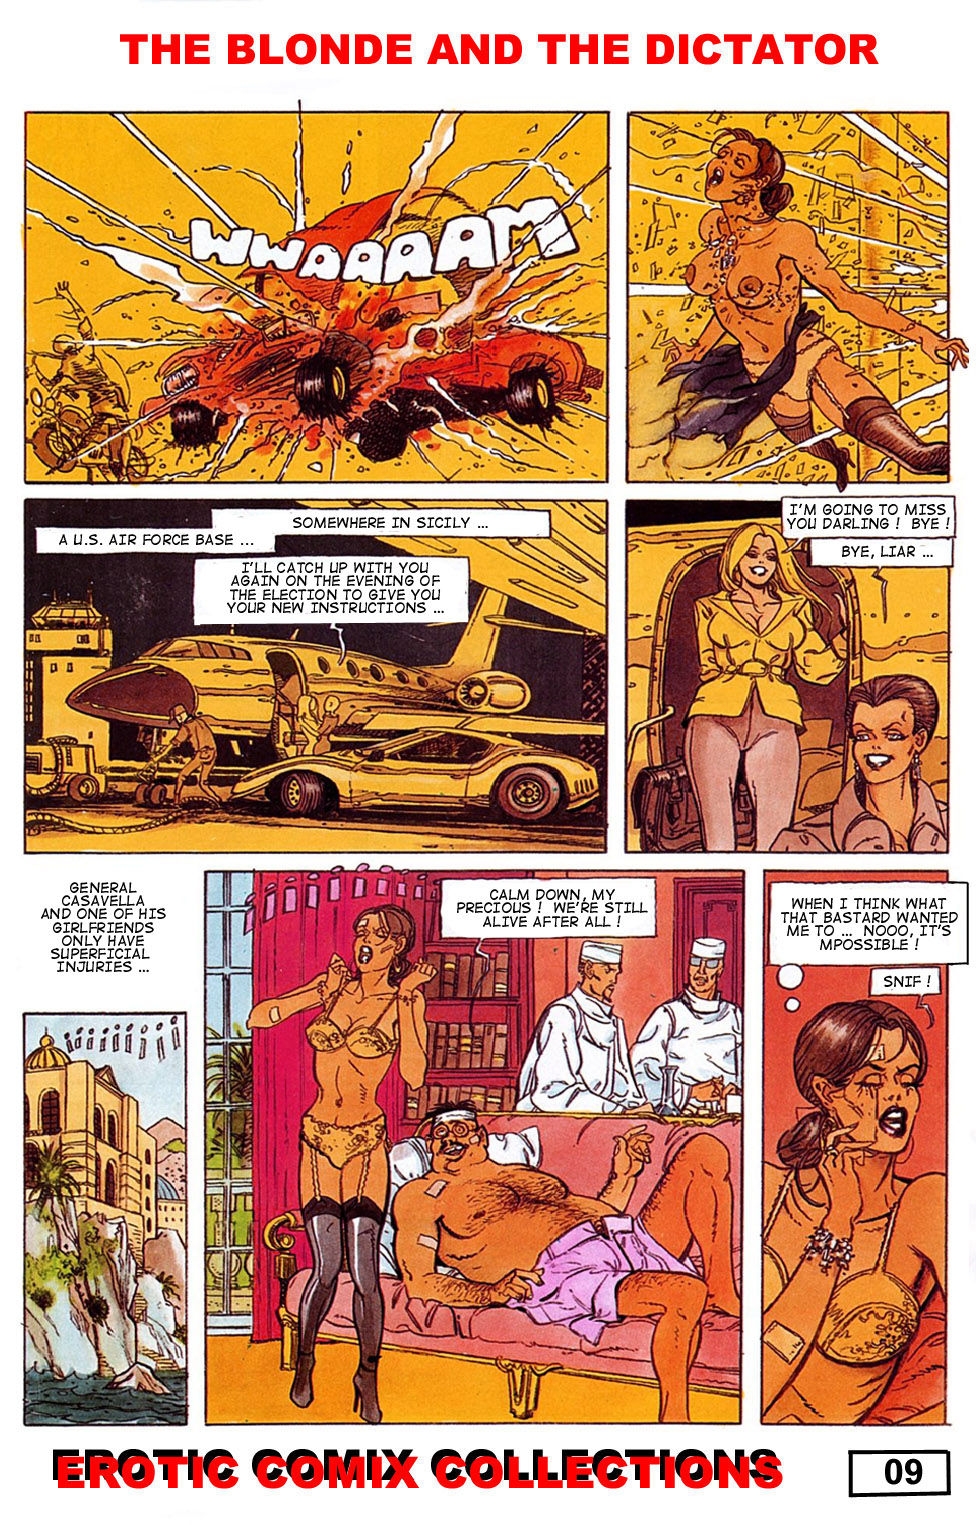 CHARLIE LOGAN #2 - THE BLONDE AND THE DICTATOR - A MALINVAUD TRANSLATION 10